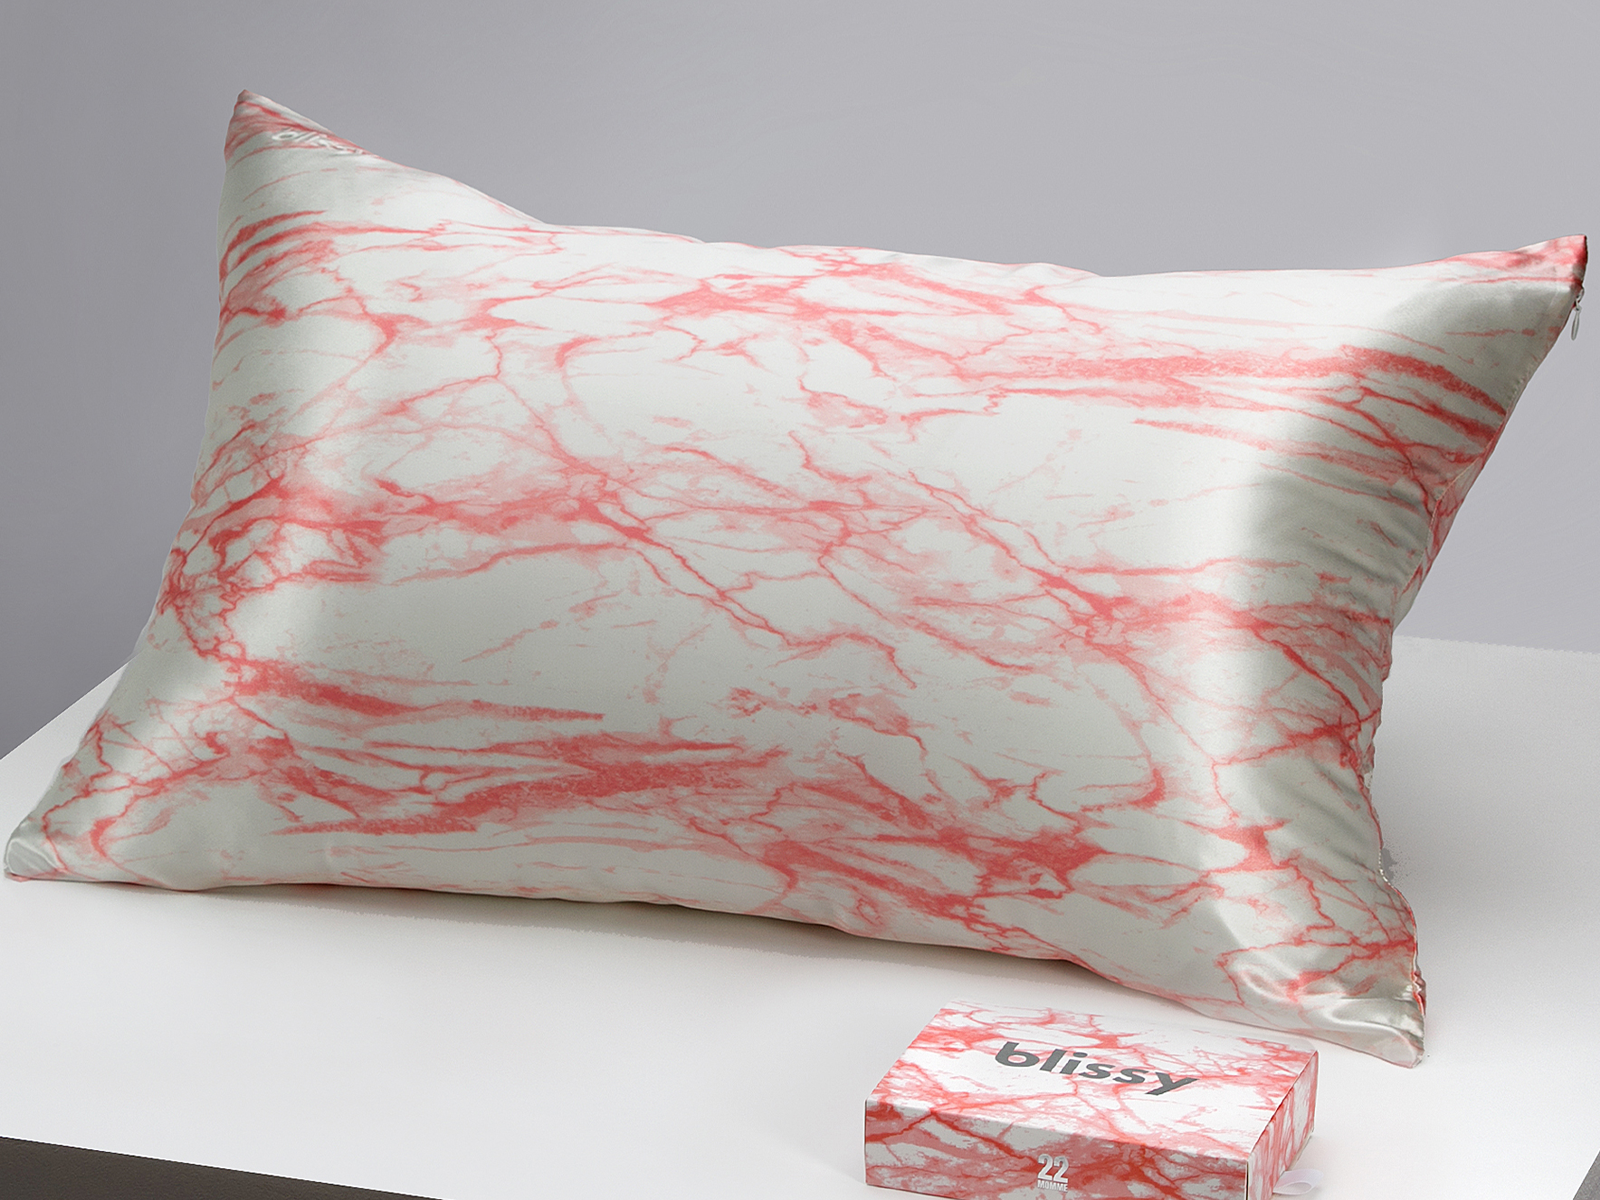 Blissy Queen 100% Mulberry Silk Pillowcase | Wht Marble